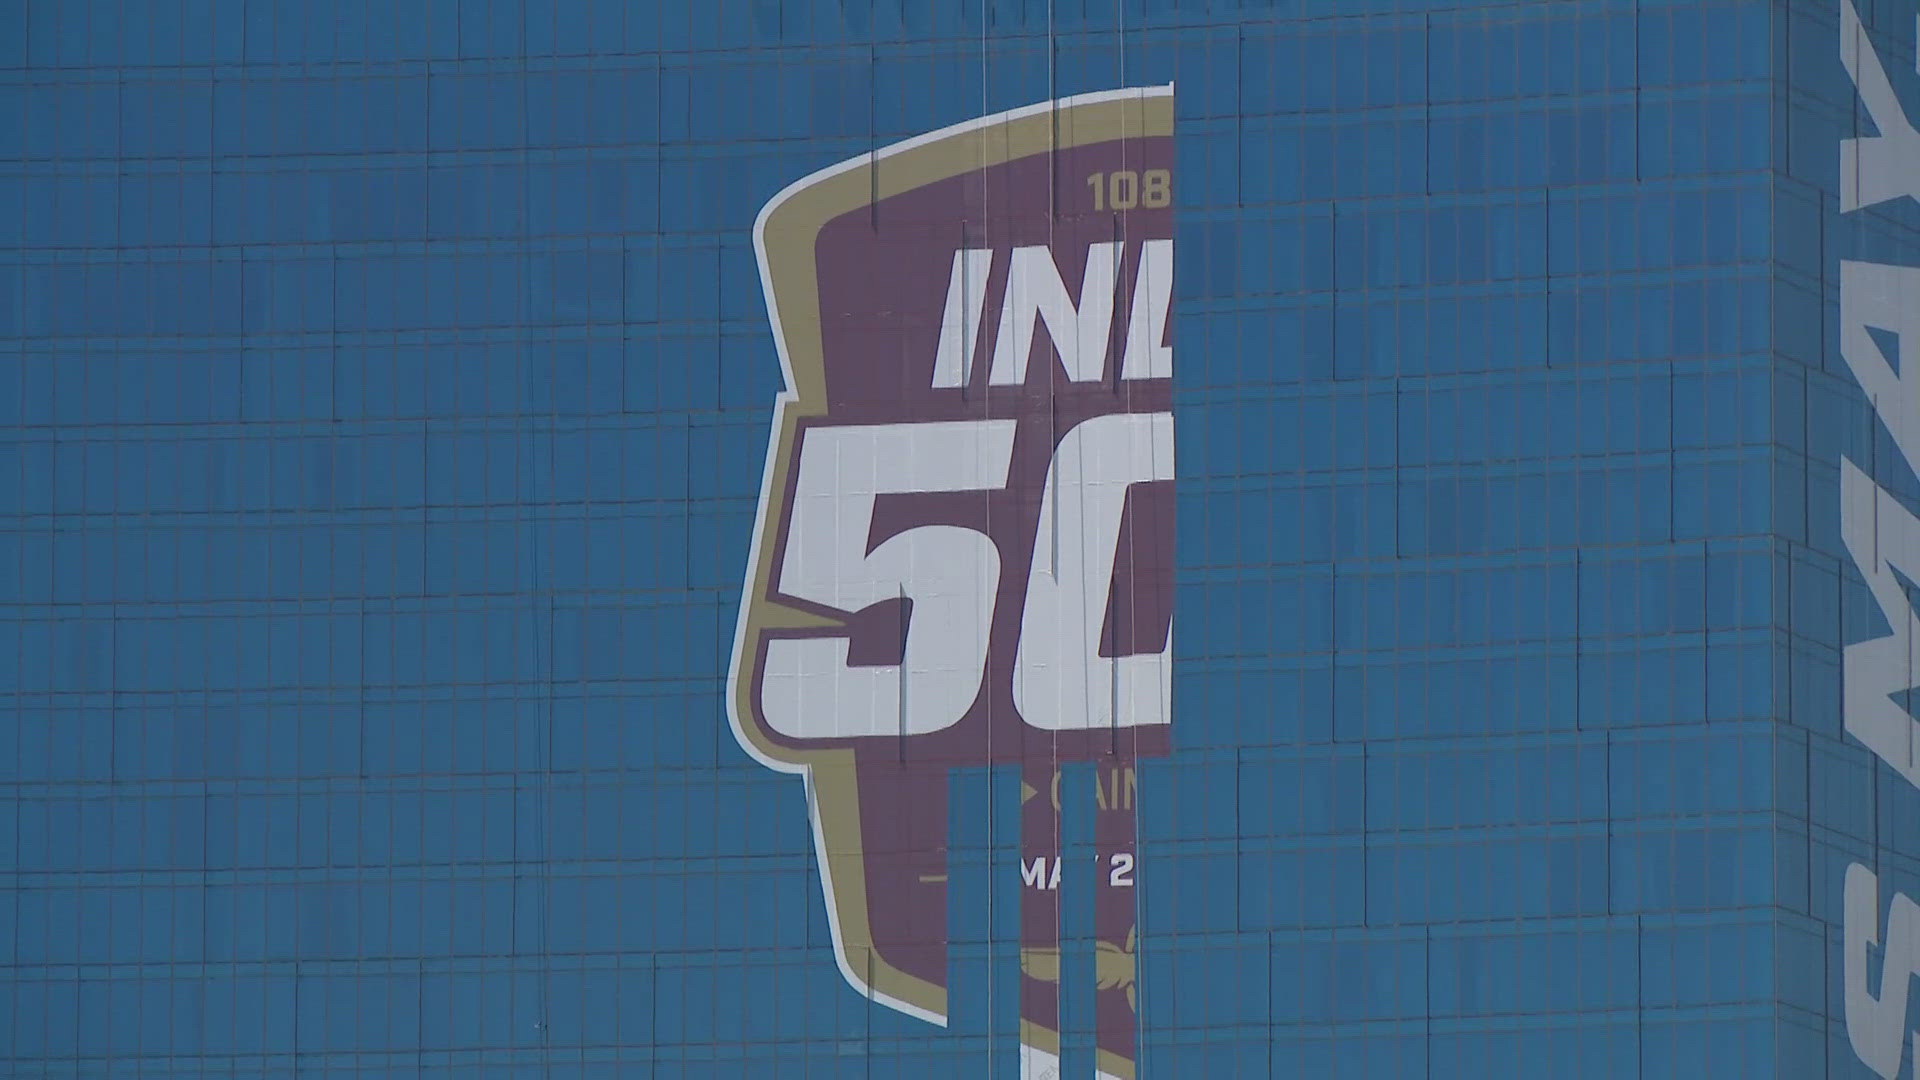 We're just 26 days away from the 108th Running of the Indianapolis 500.